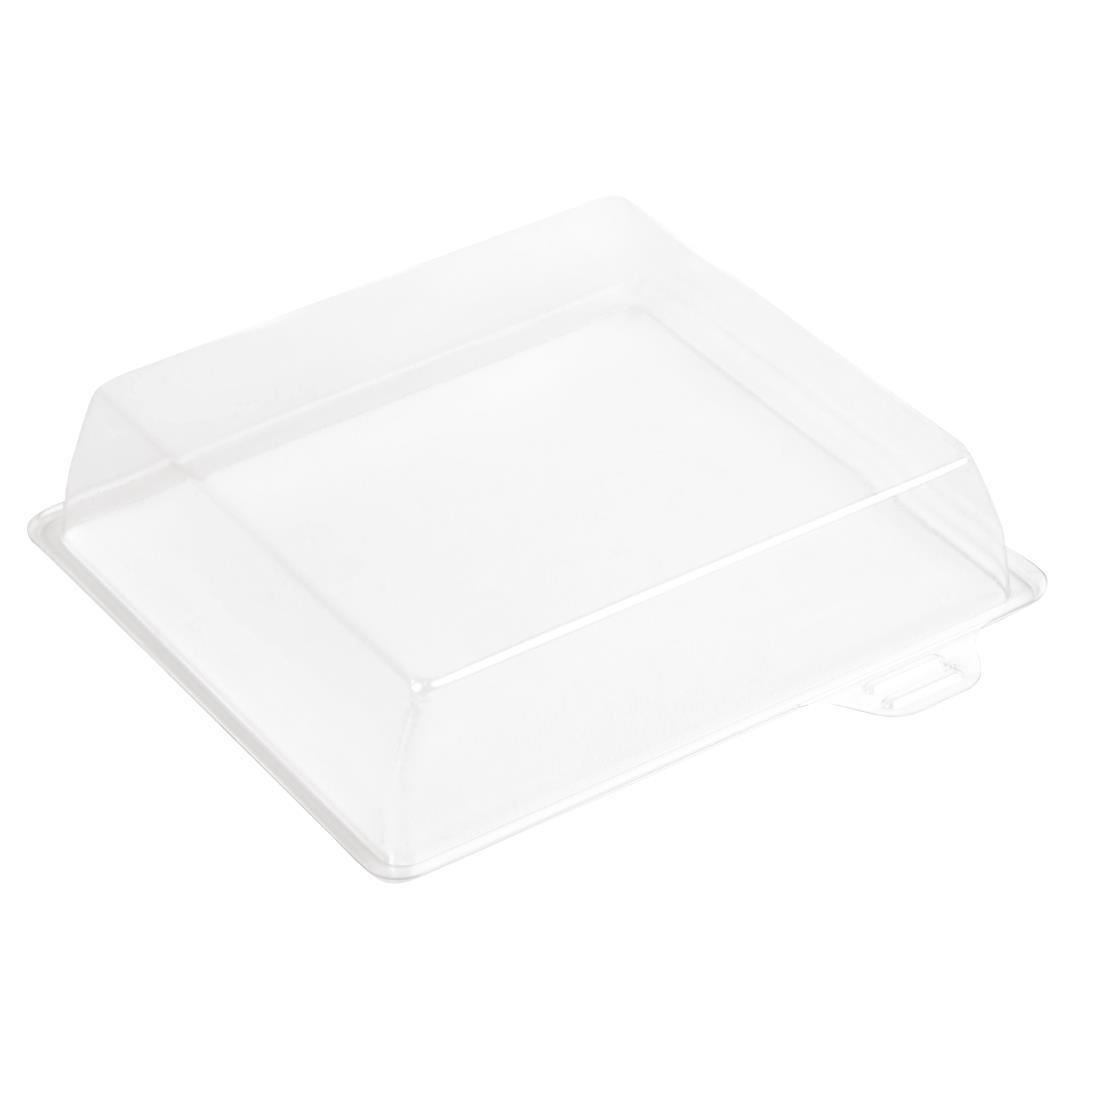 Faerch Recyclable Sushi Snack Tray Lids 111 x 109mm (Pack of 2400) - FB293  - 1